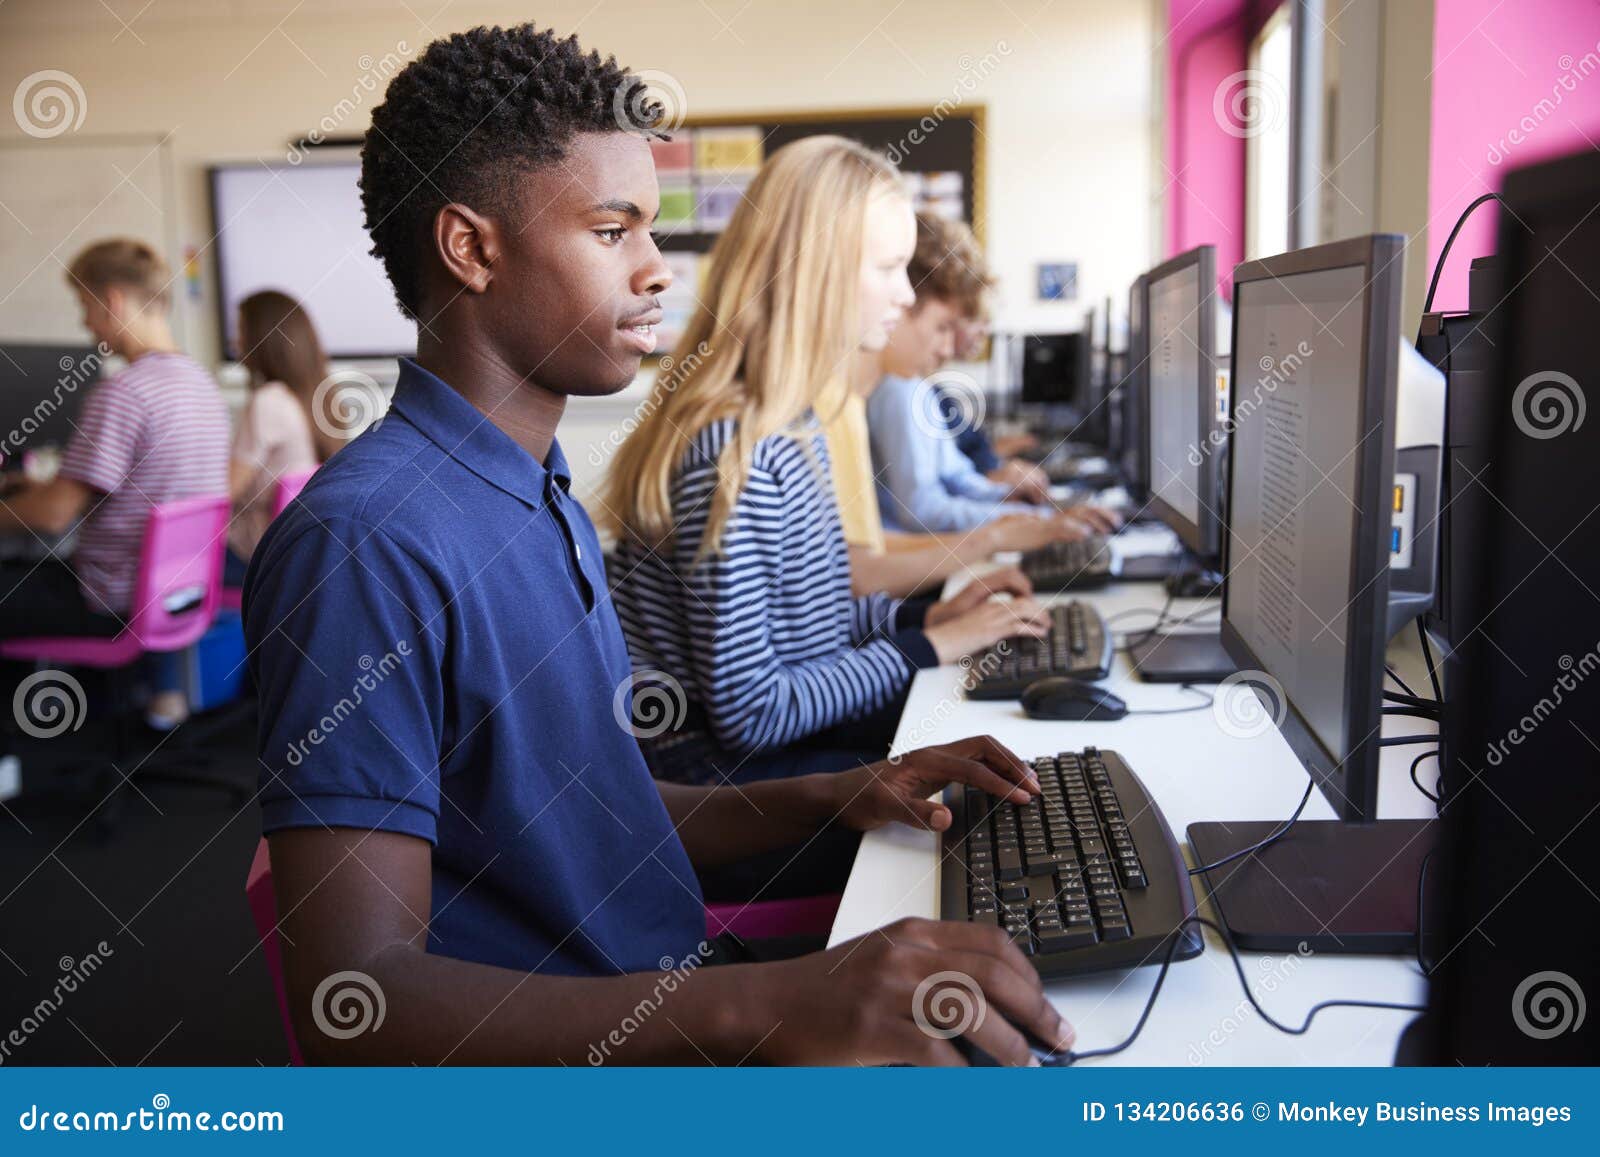 line of teenage high school students studying in computer class